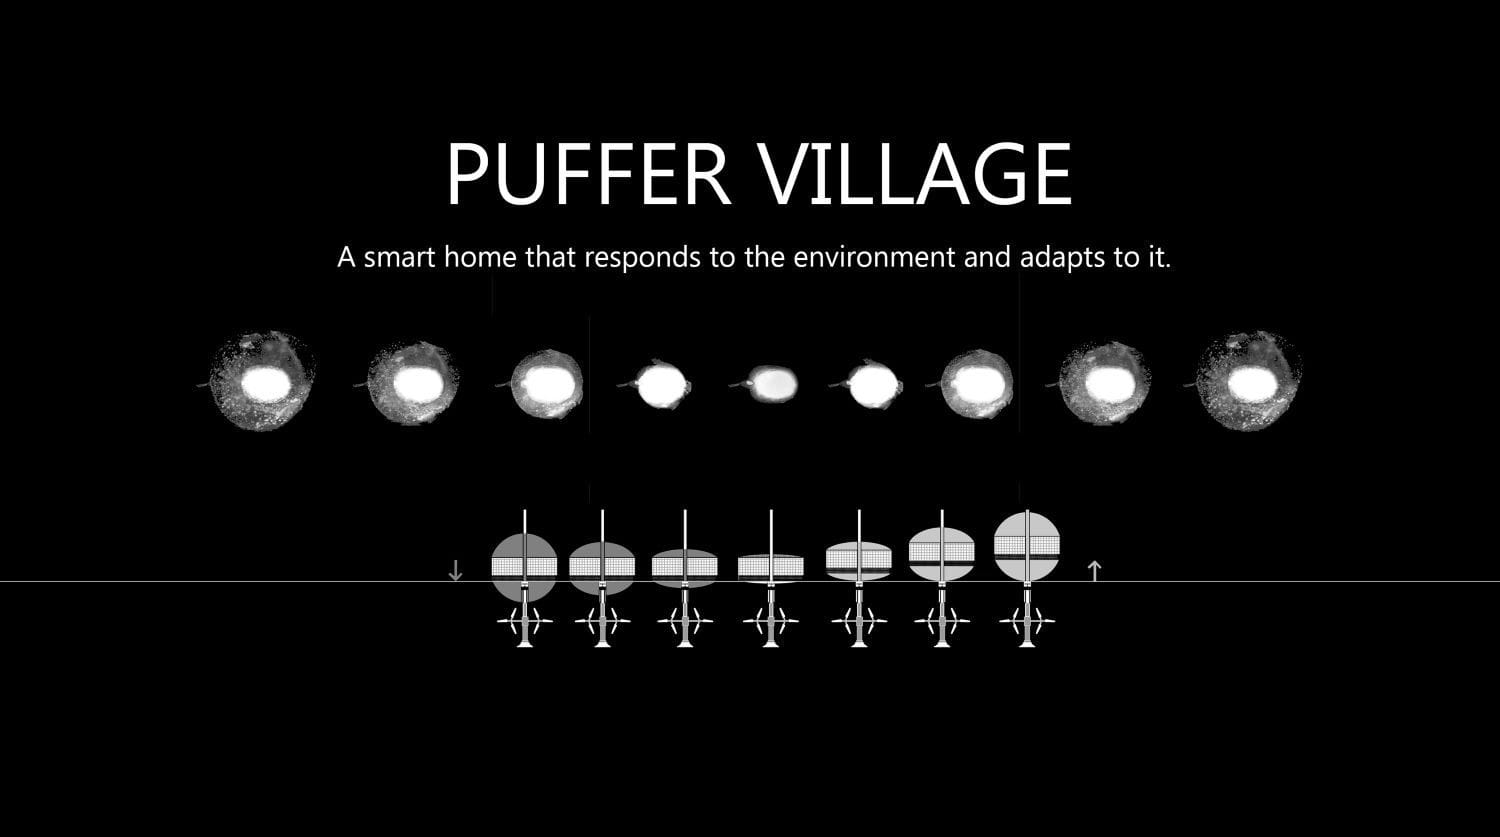 Inflatable “Puffer Village” Concept Protects Homes from Rising Sea Levels